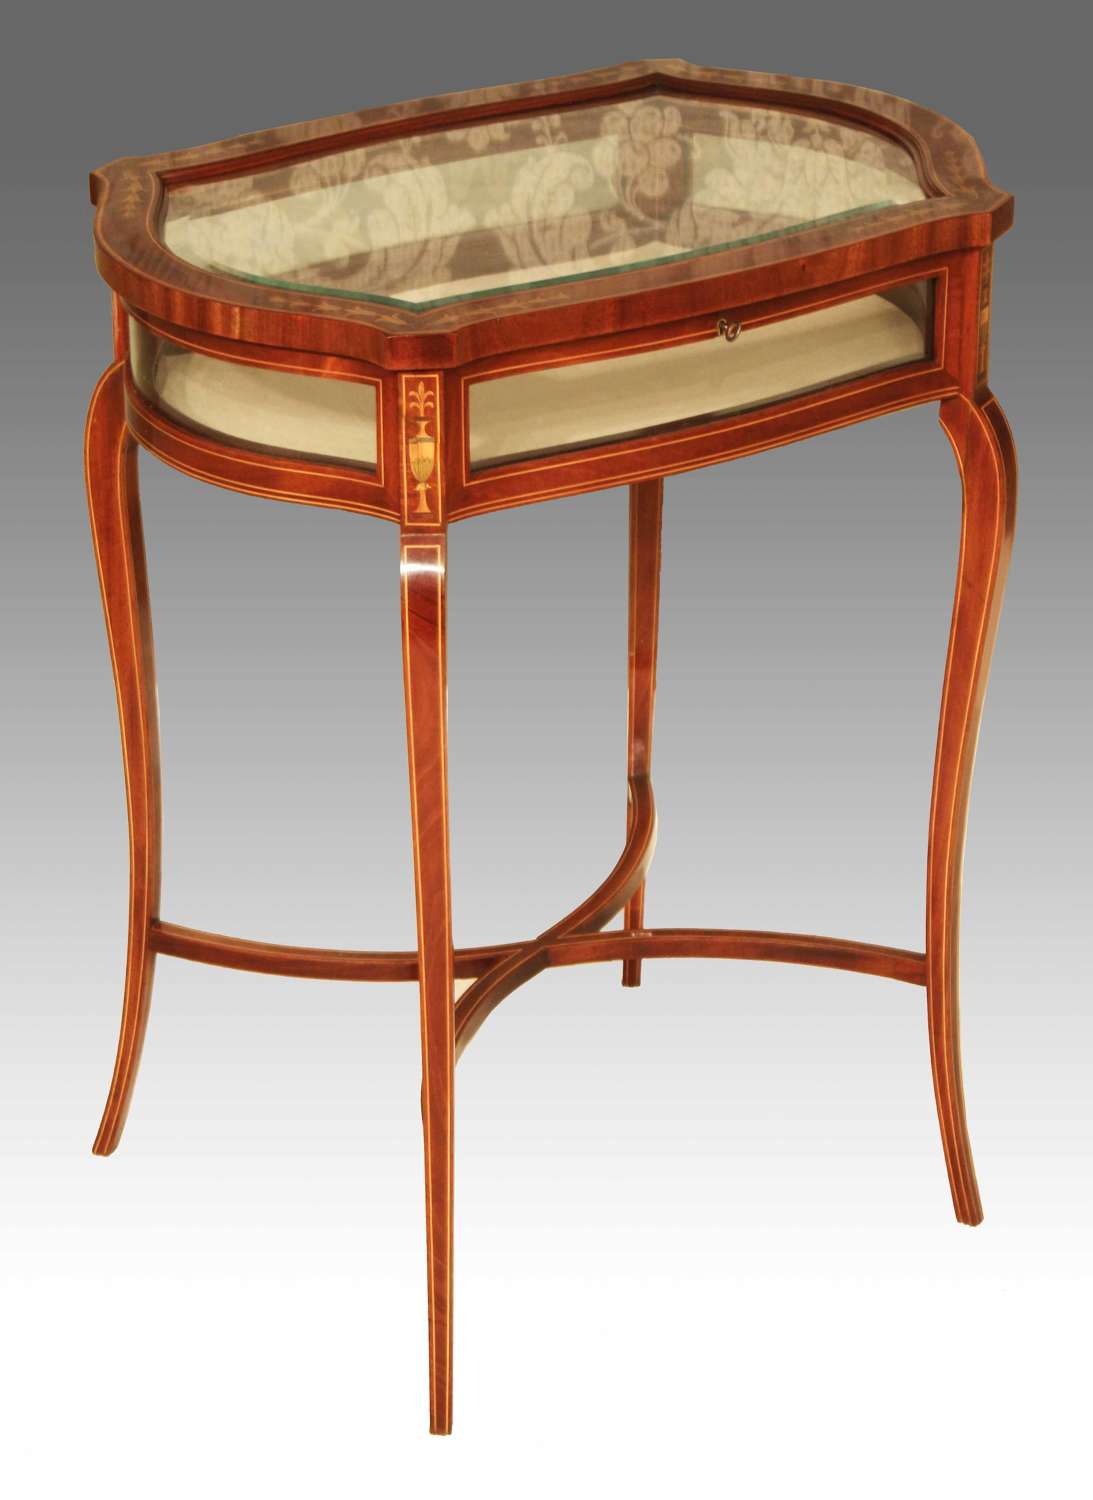 A late Victorian mahogany inlaid serpentine shaped bijouterie table